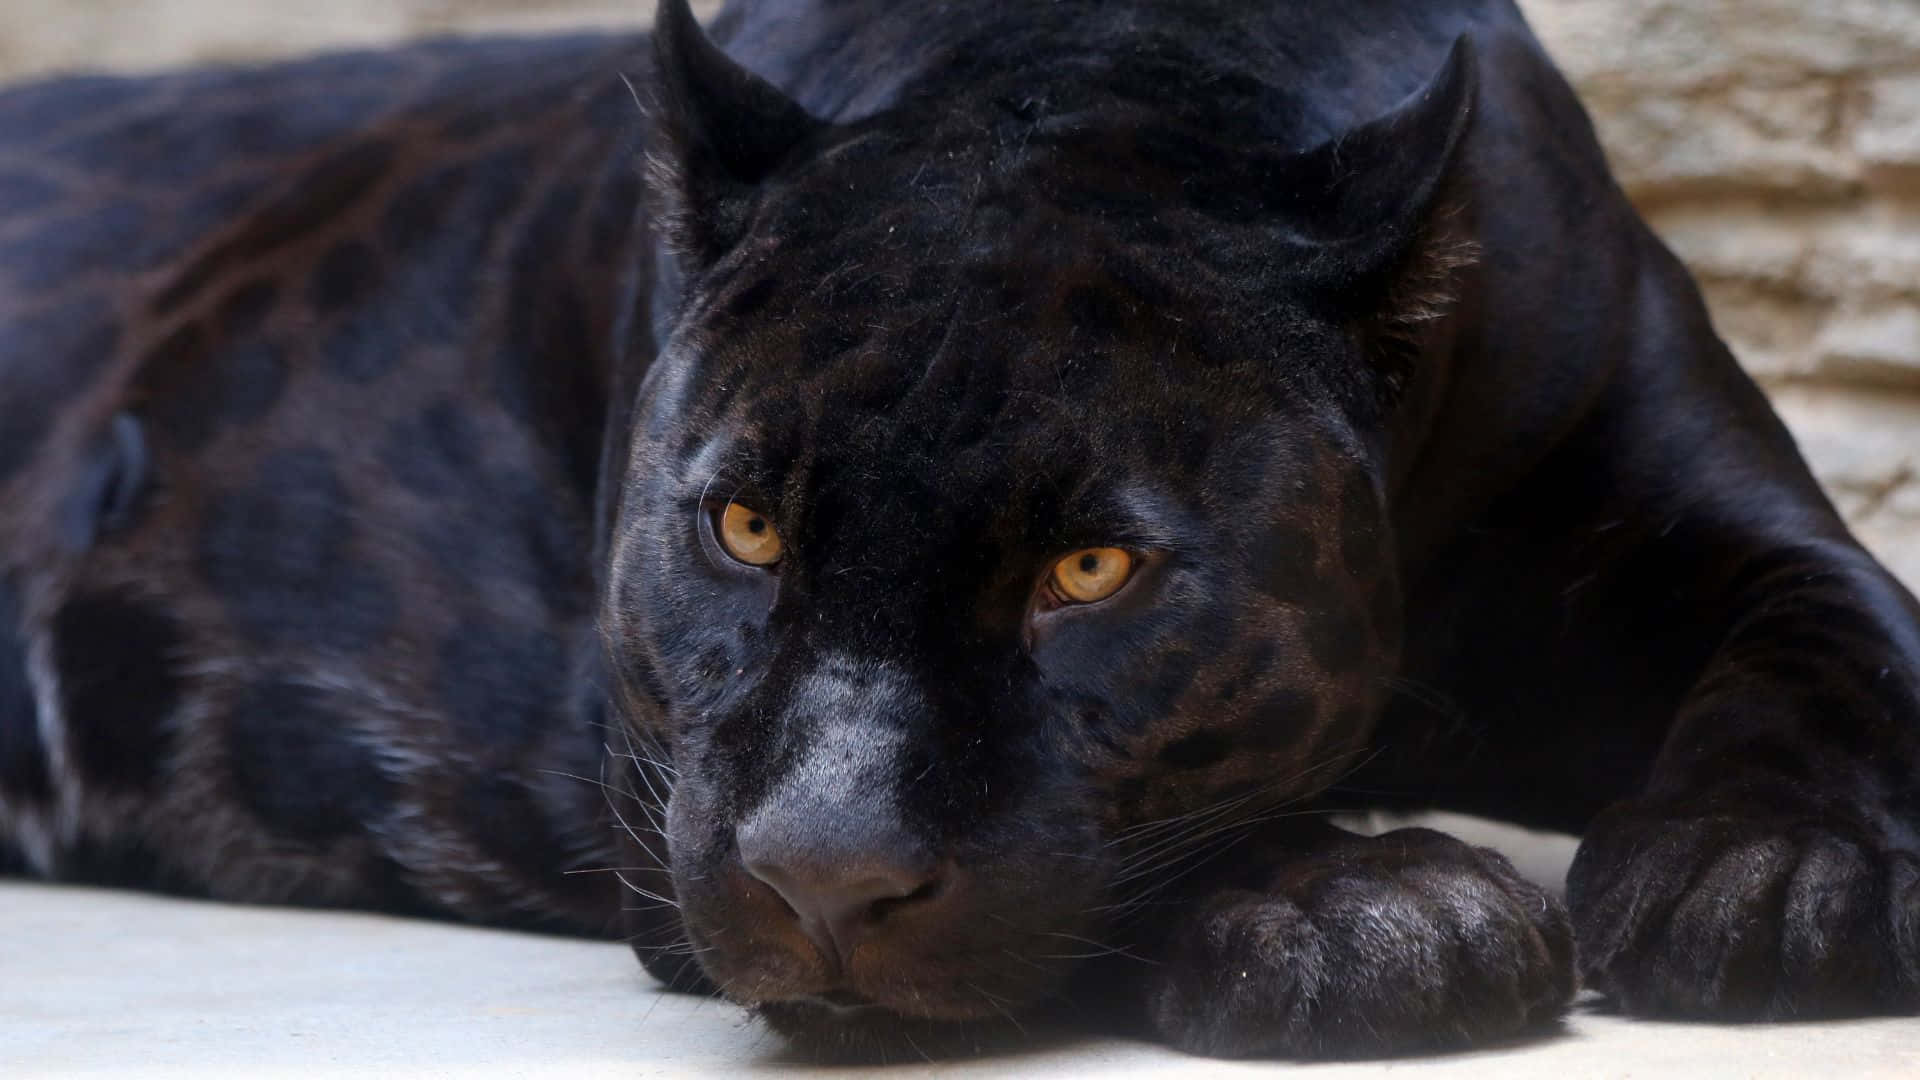 Majestic Black Panther Prowling in Its Natural Habitat